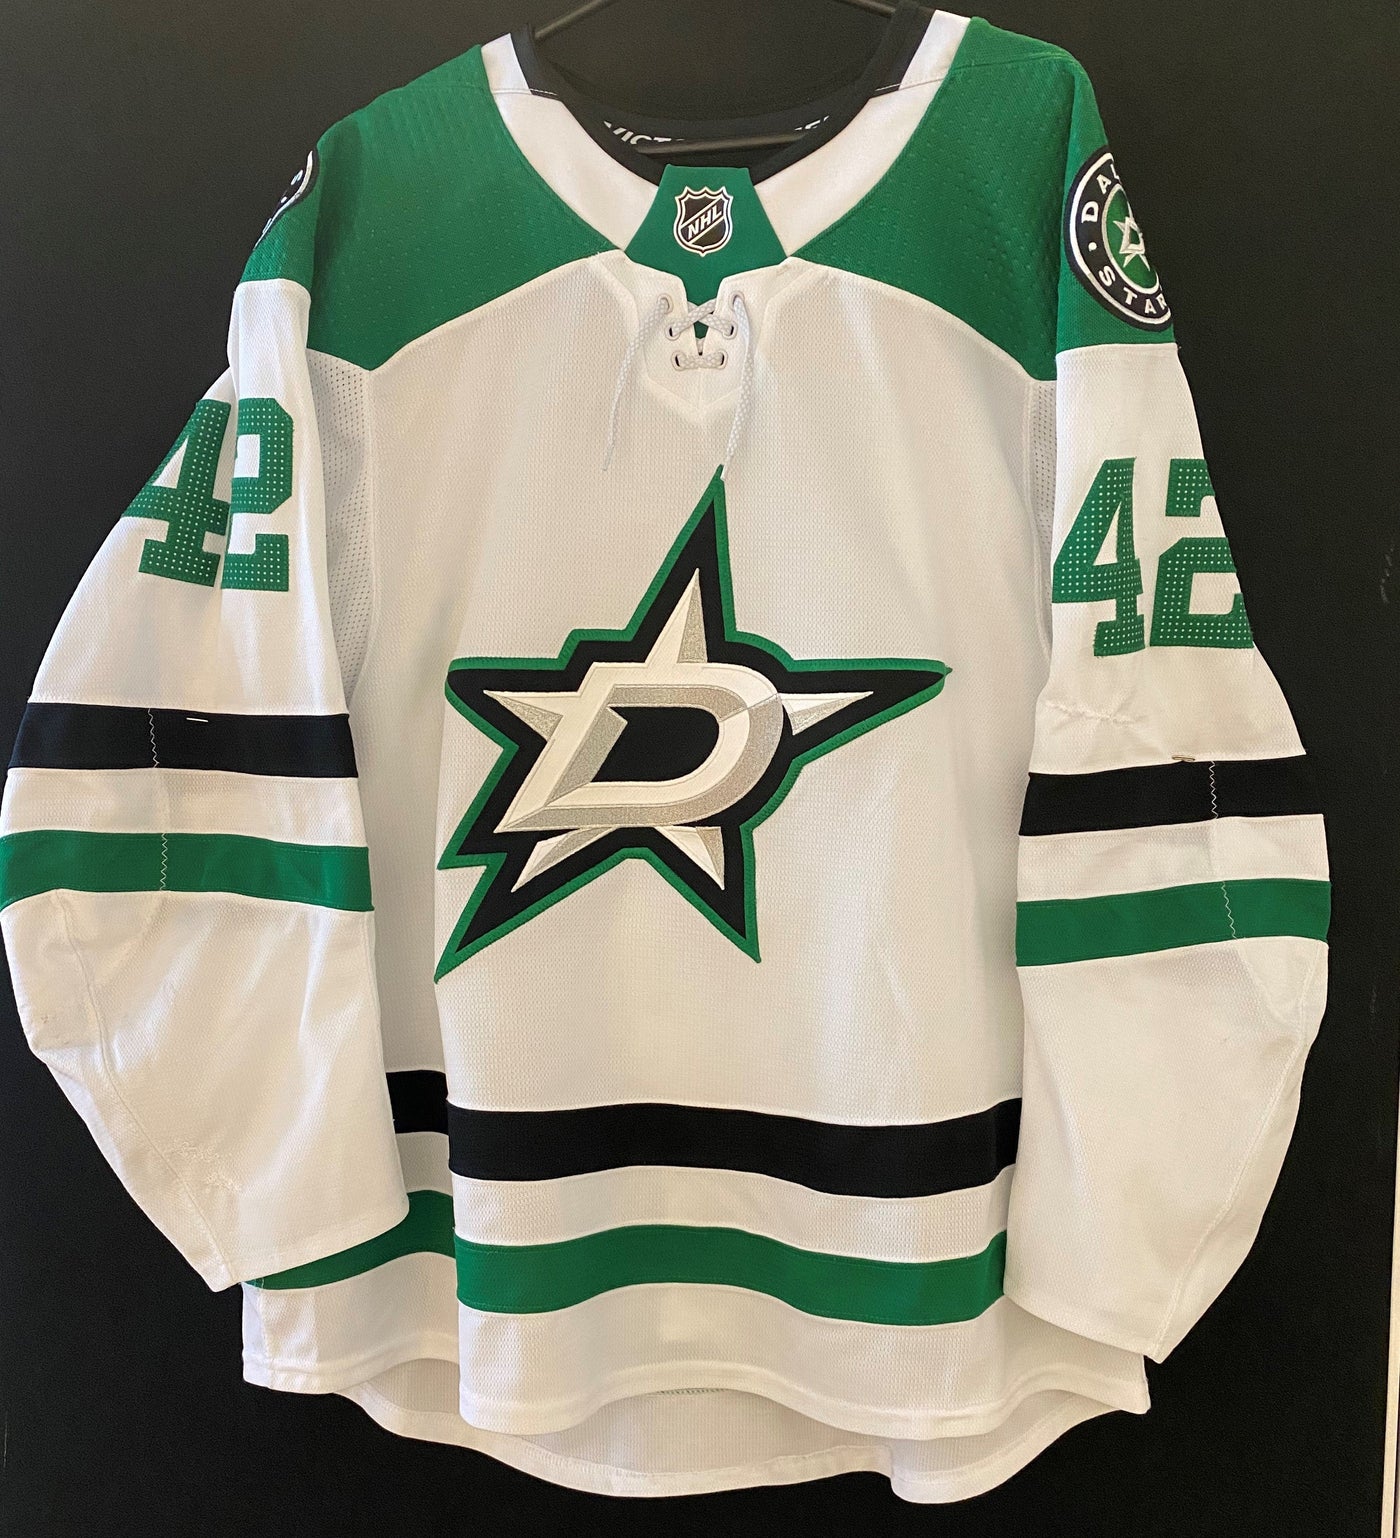 Taylor Fedun 18/19 Game Worn Away Jersey Set 3 in Green and White - Front View